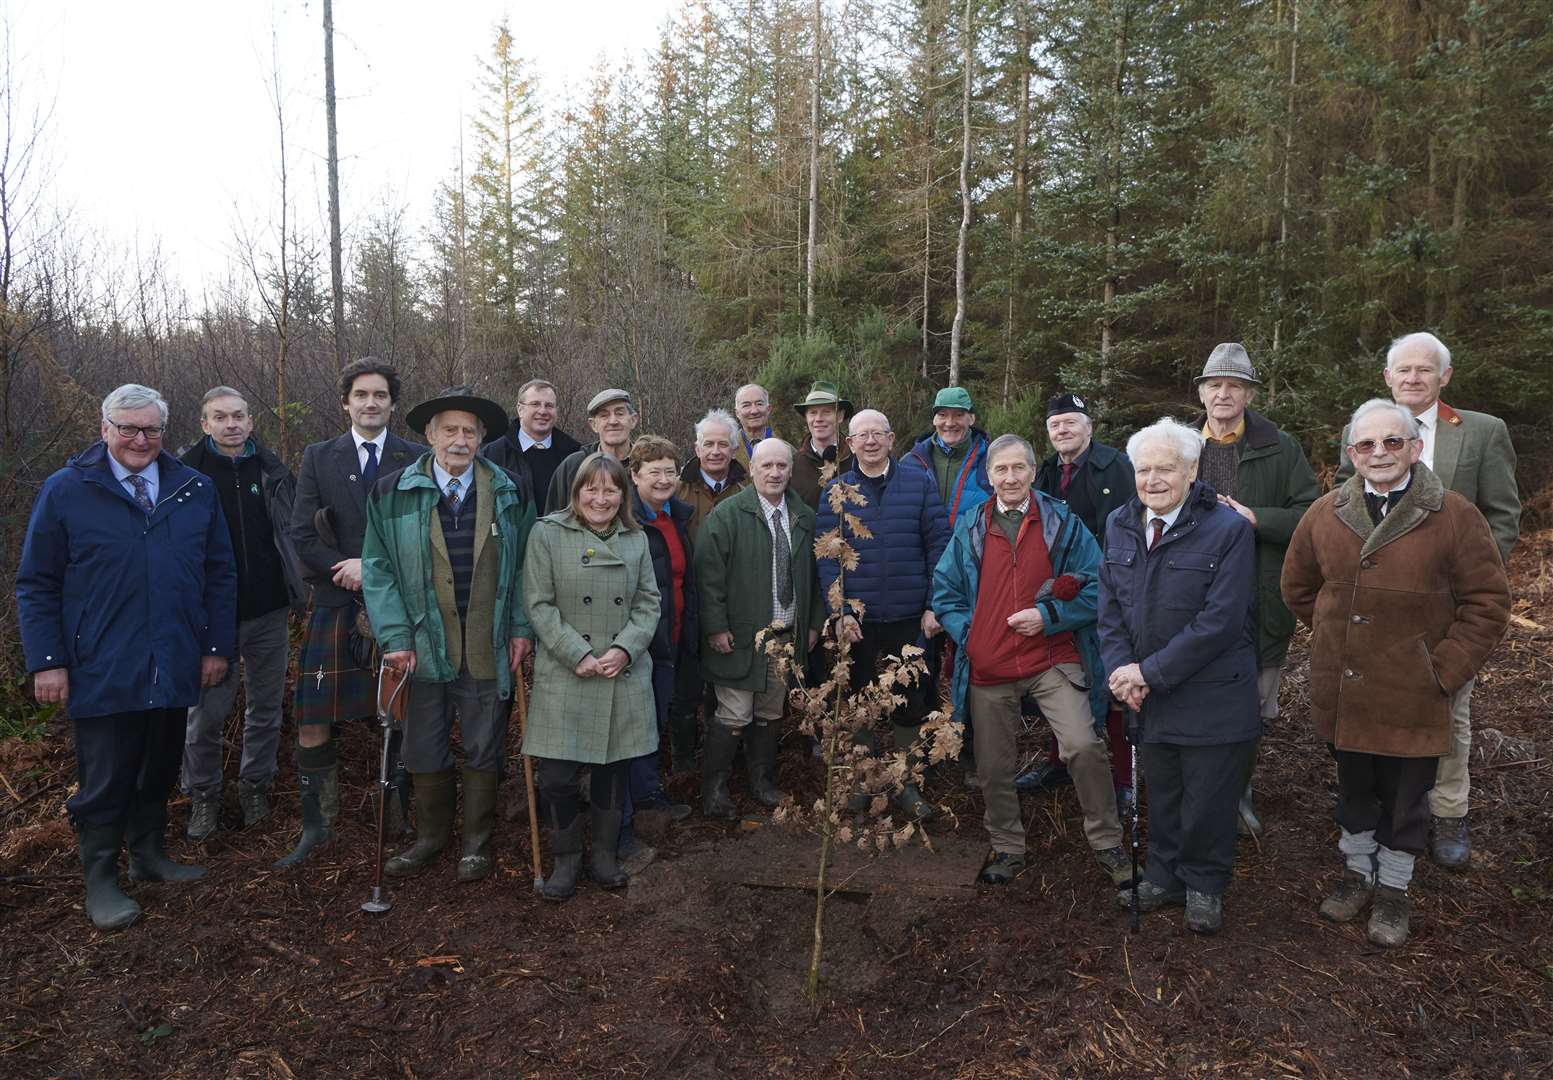 Guests gather at Monaughty Forest for the historic reenactment including Fergus Ewing (left) and Lord Lovat (third from left).